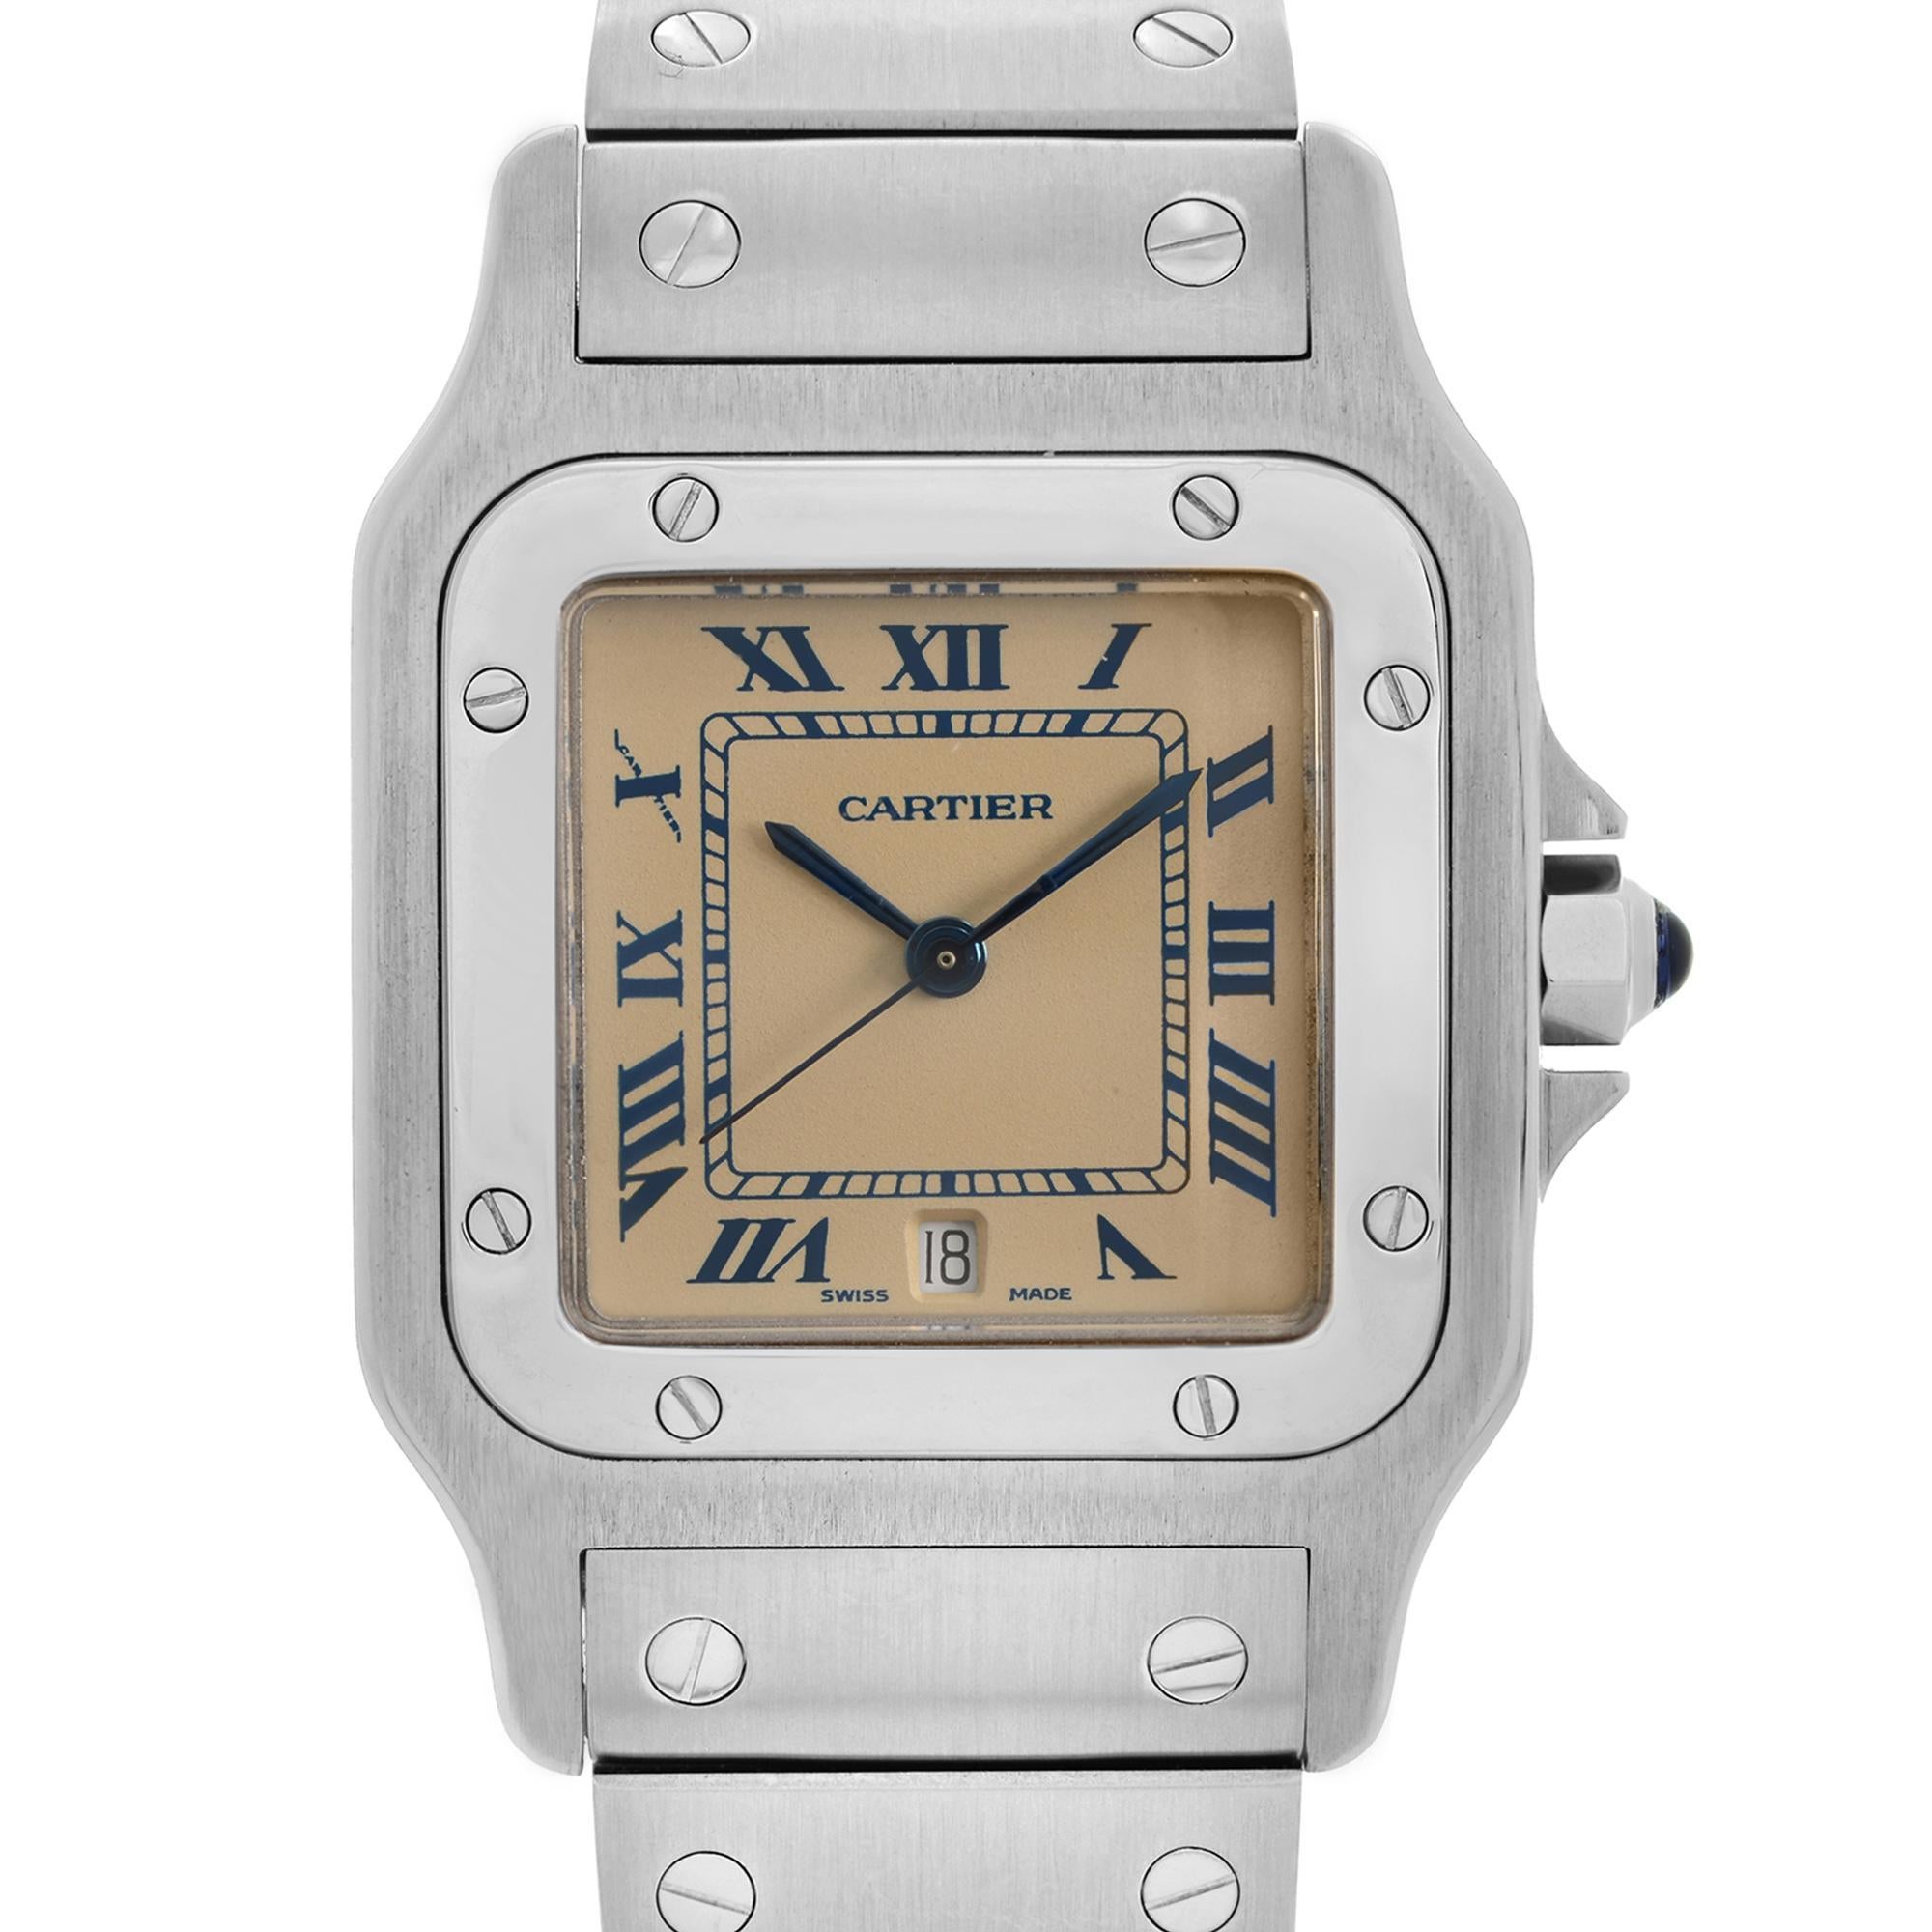 Pre-owned Cartier Santos Galbee 29mm Stainless Steel Cream Dial Men's Quartz Watch 987901. Small Damage on Seconds Hands Under Closer Inspection with the help of magnifying glass only. . This Beautiful Timepiece is Powered by Quartz (Battery)